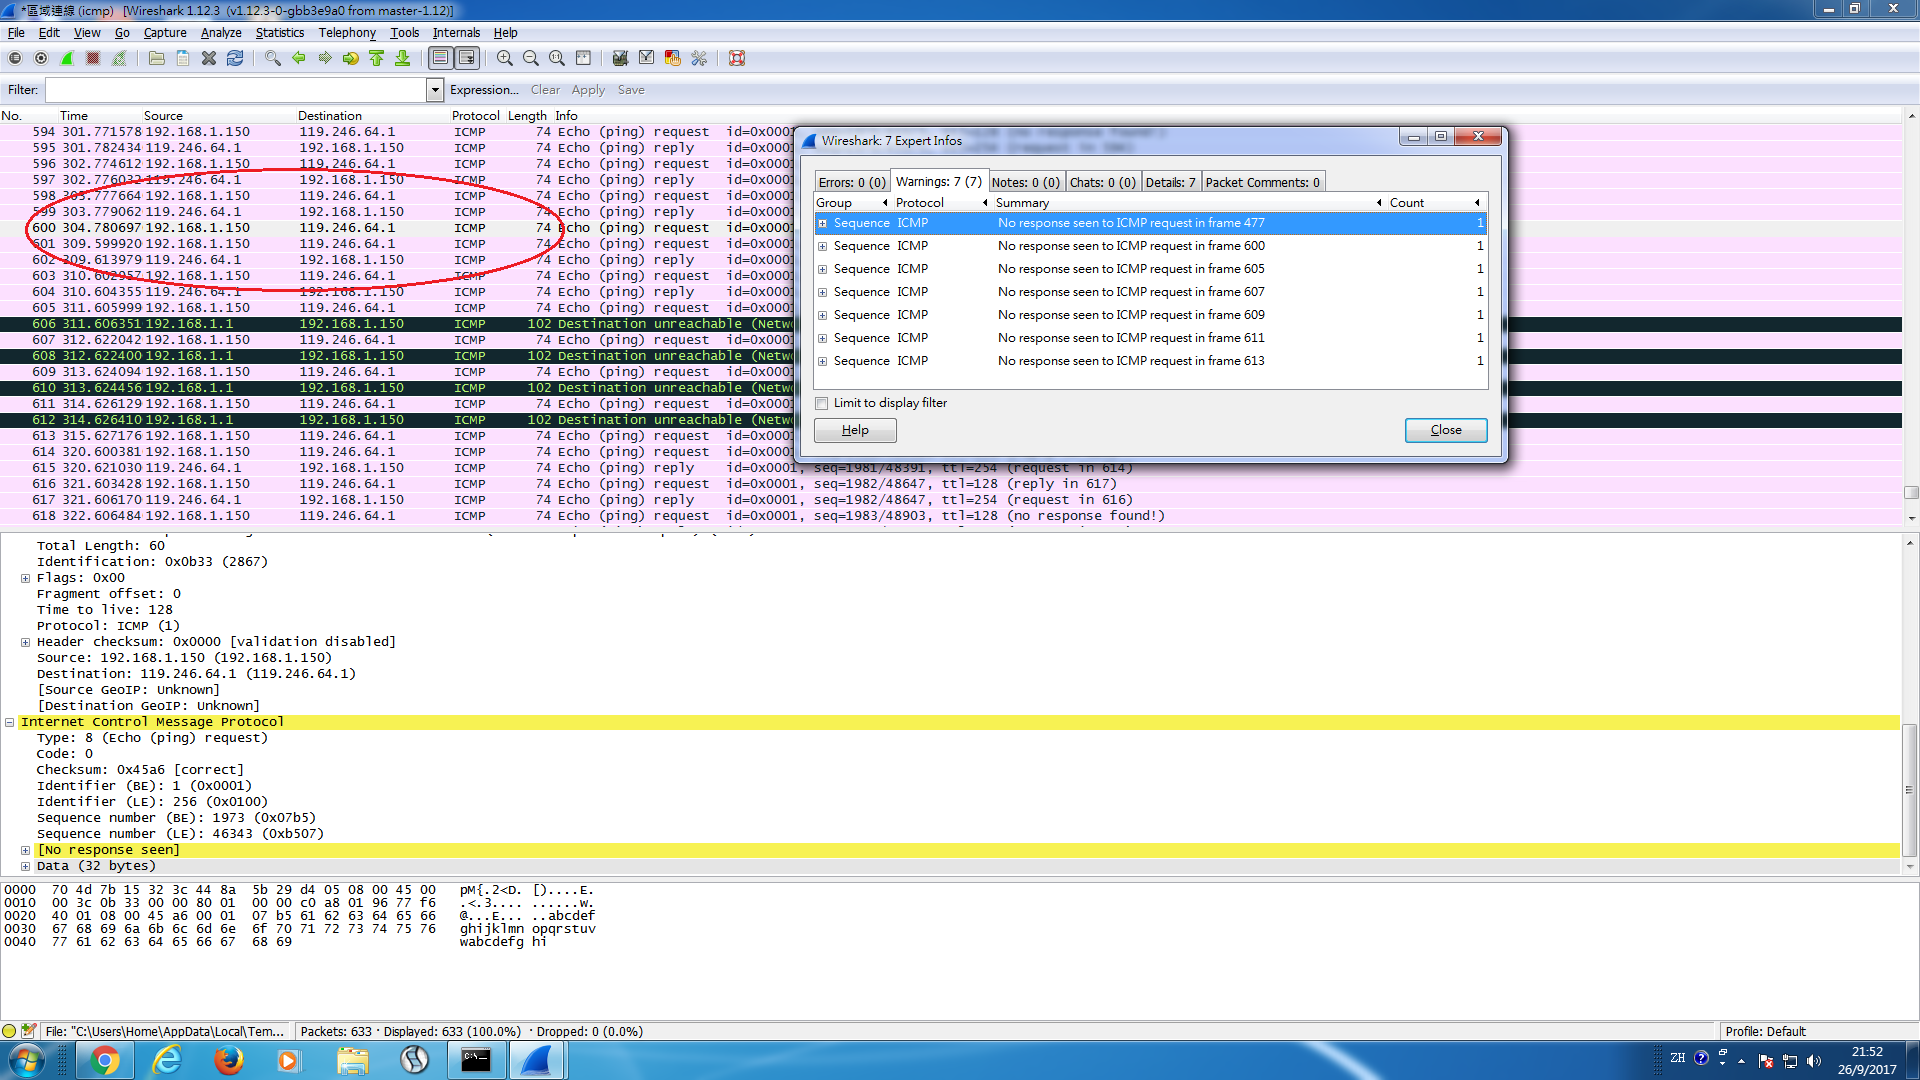 wireshark capture packets from router